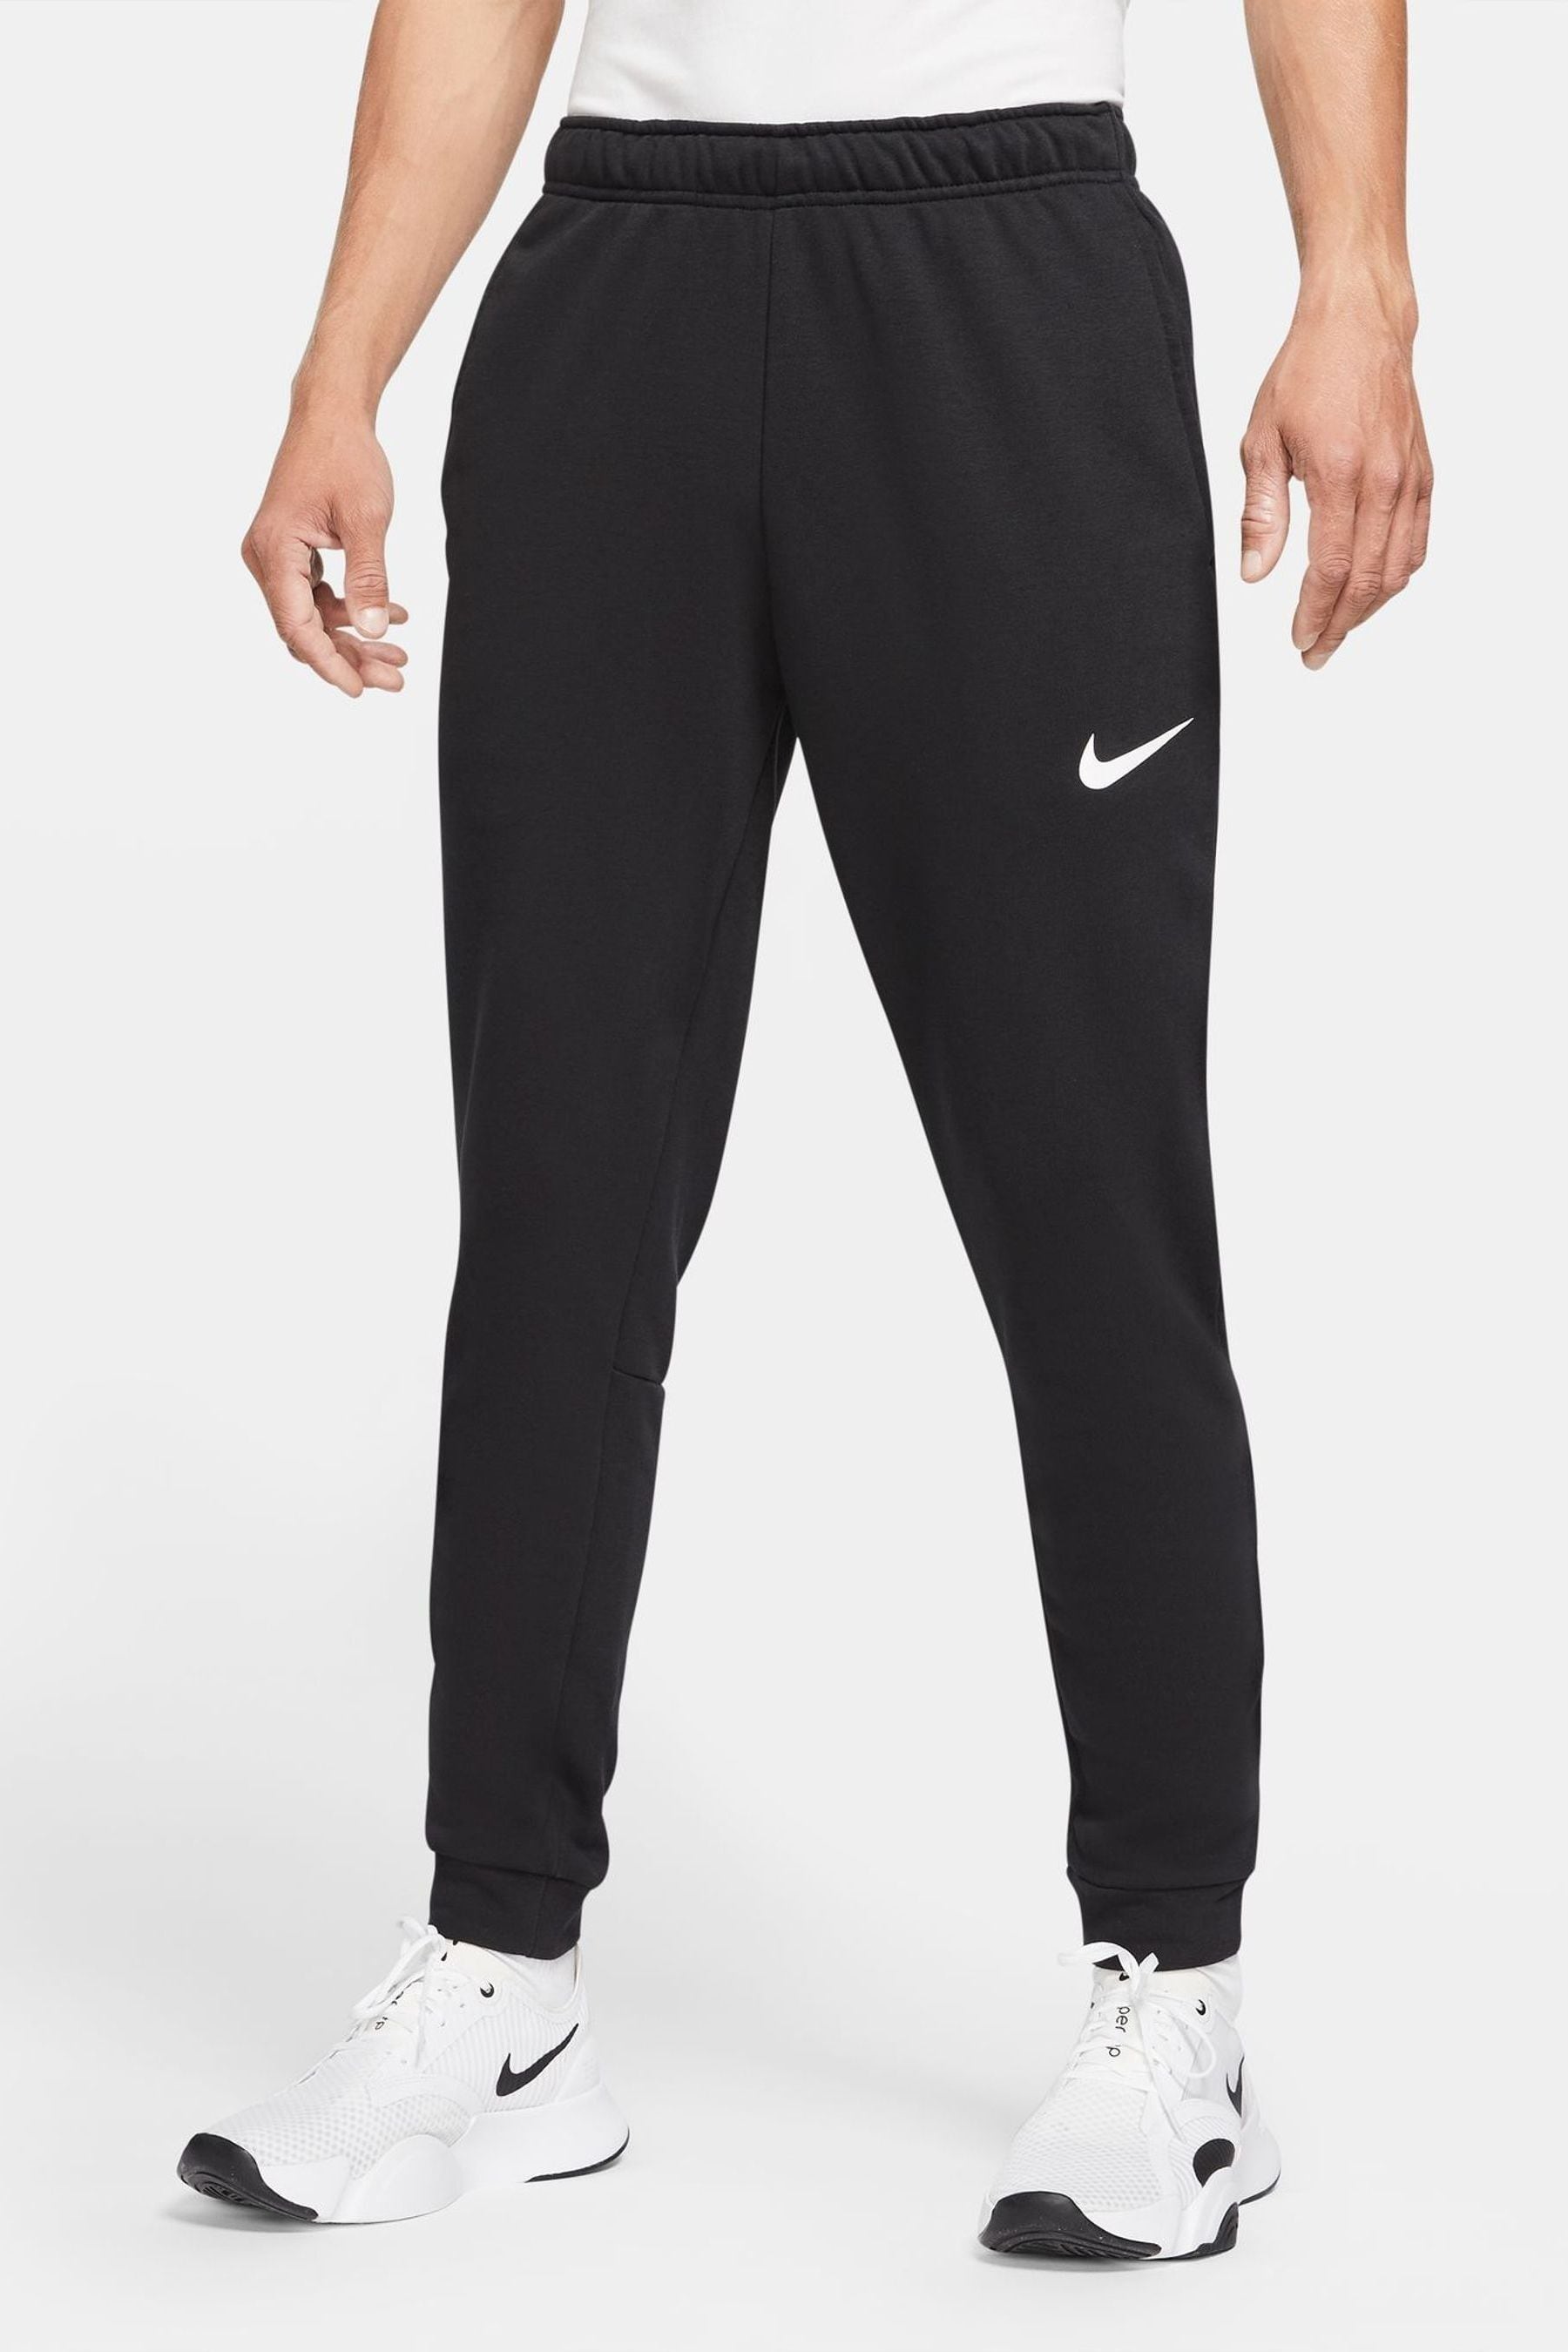 Buy Nike Dri-FIT Tapered Training Joggers from the Next UK online shop